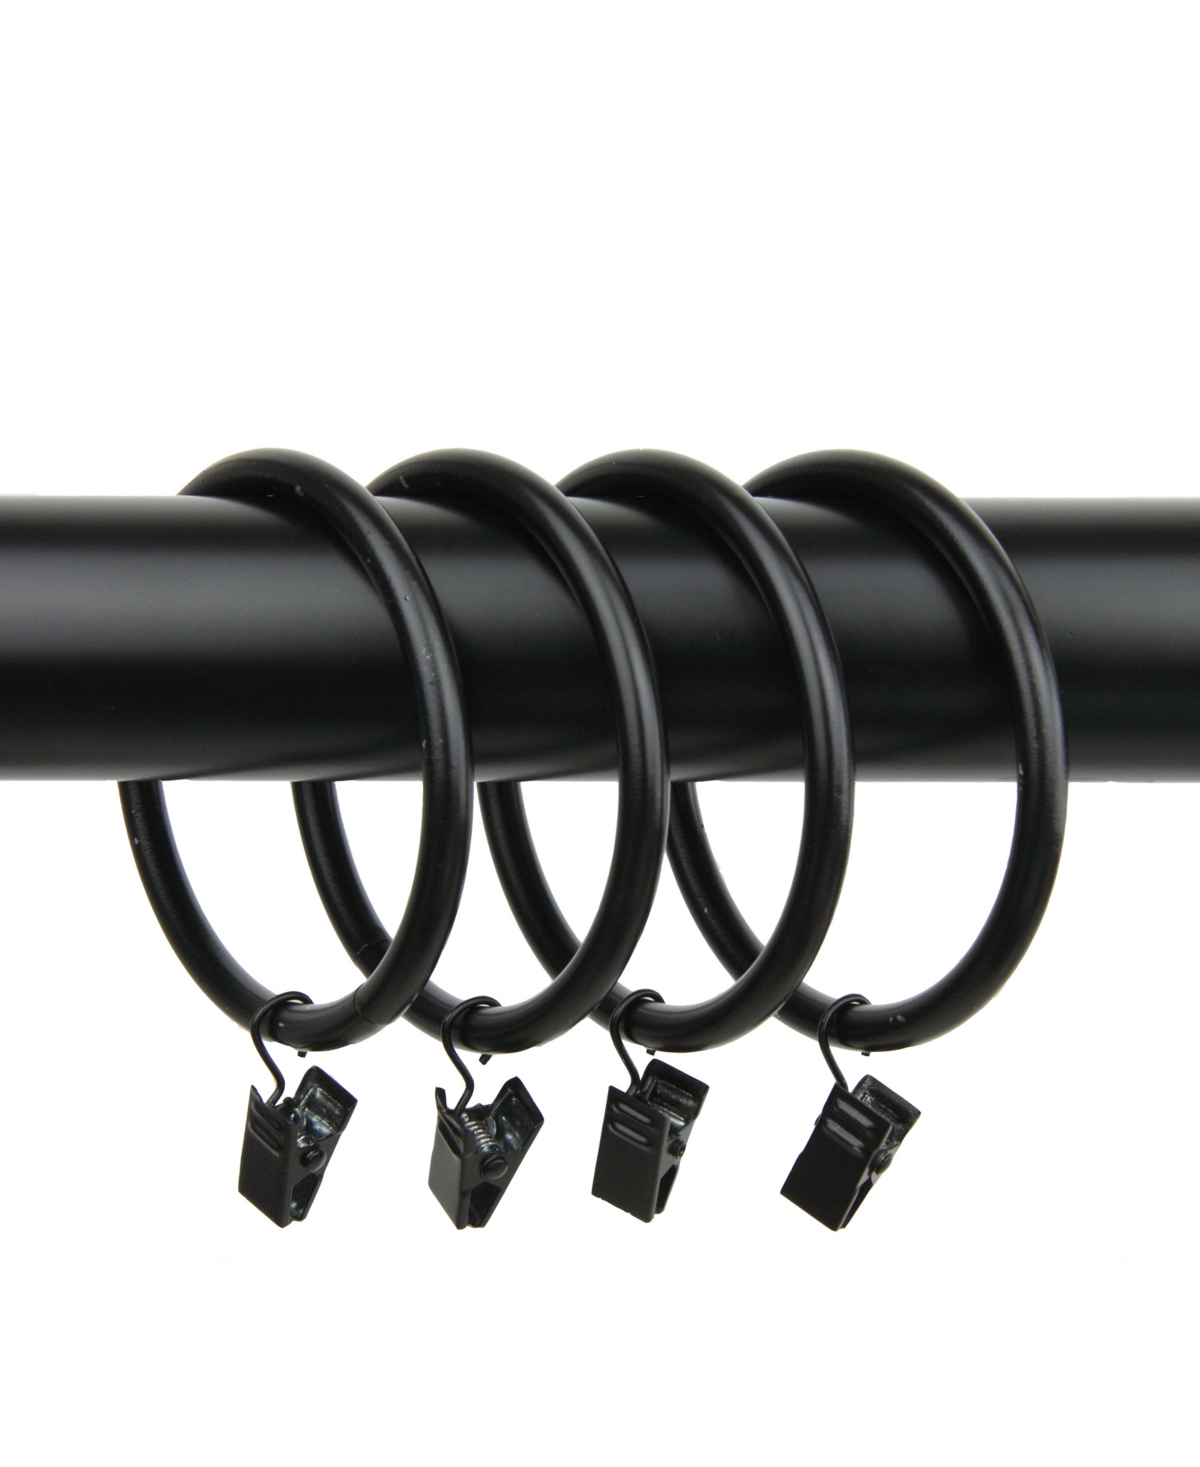 2-1/2" Curtain Rings w/ Clip (Set of 10) - Black